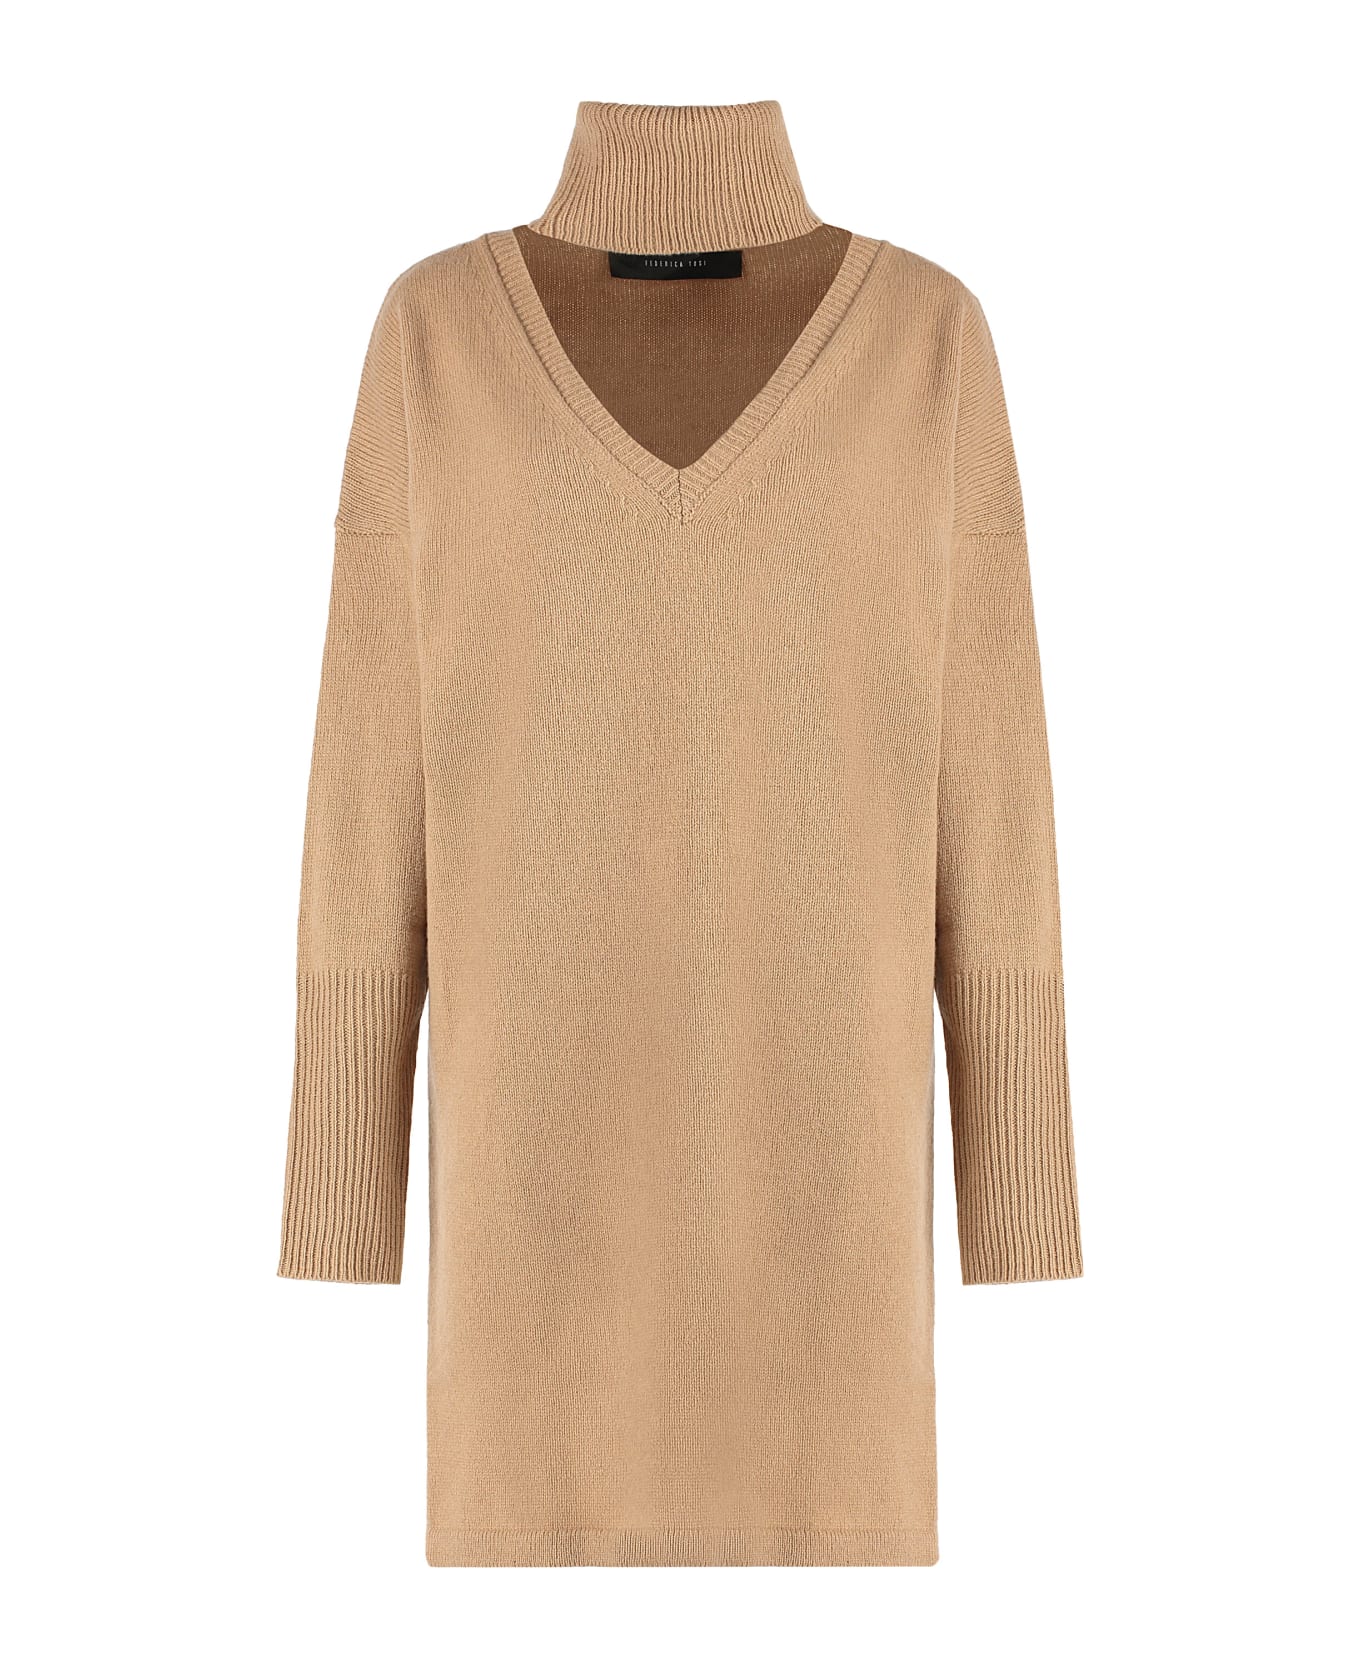 Federica Tosi Ribbed Knit Dress - Camel